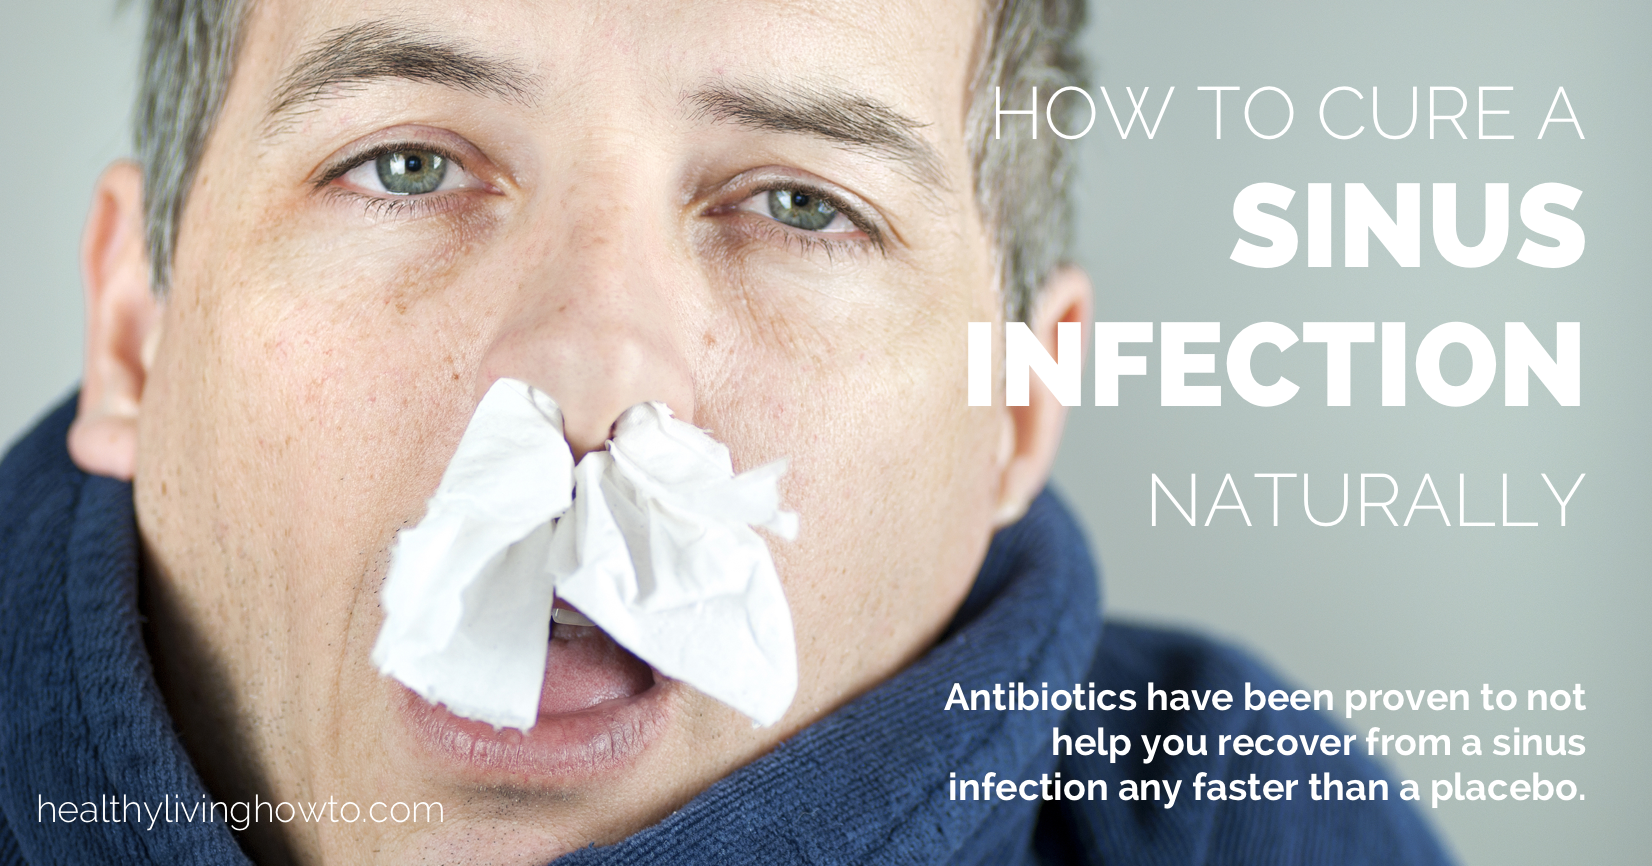 How To Cure A Sinus Infection Naturally | healthylivinghowto.com